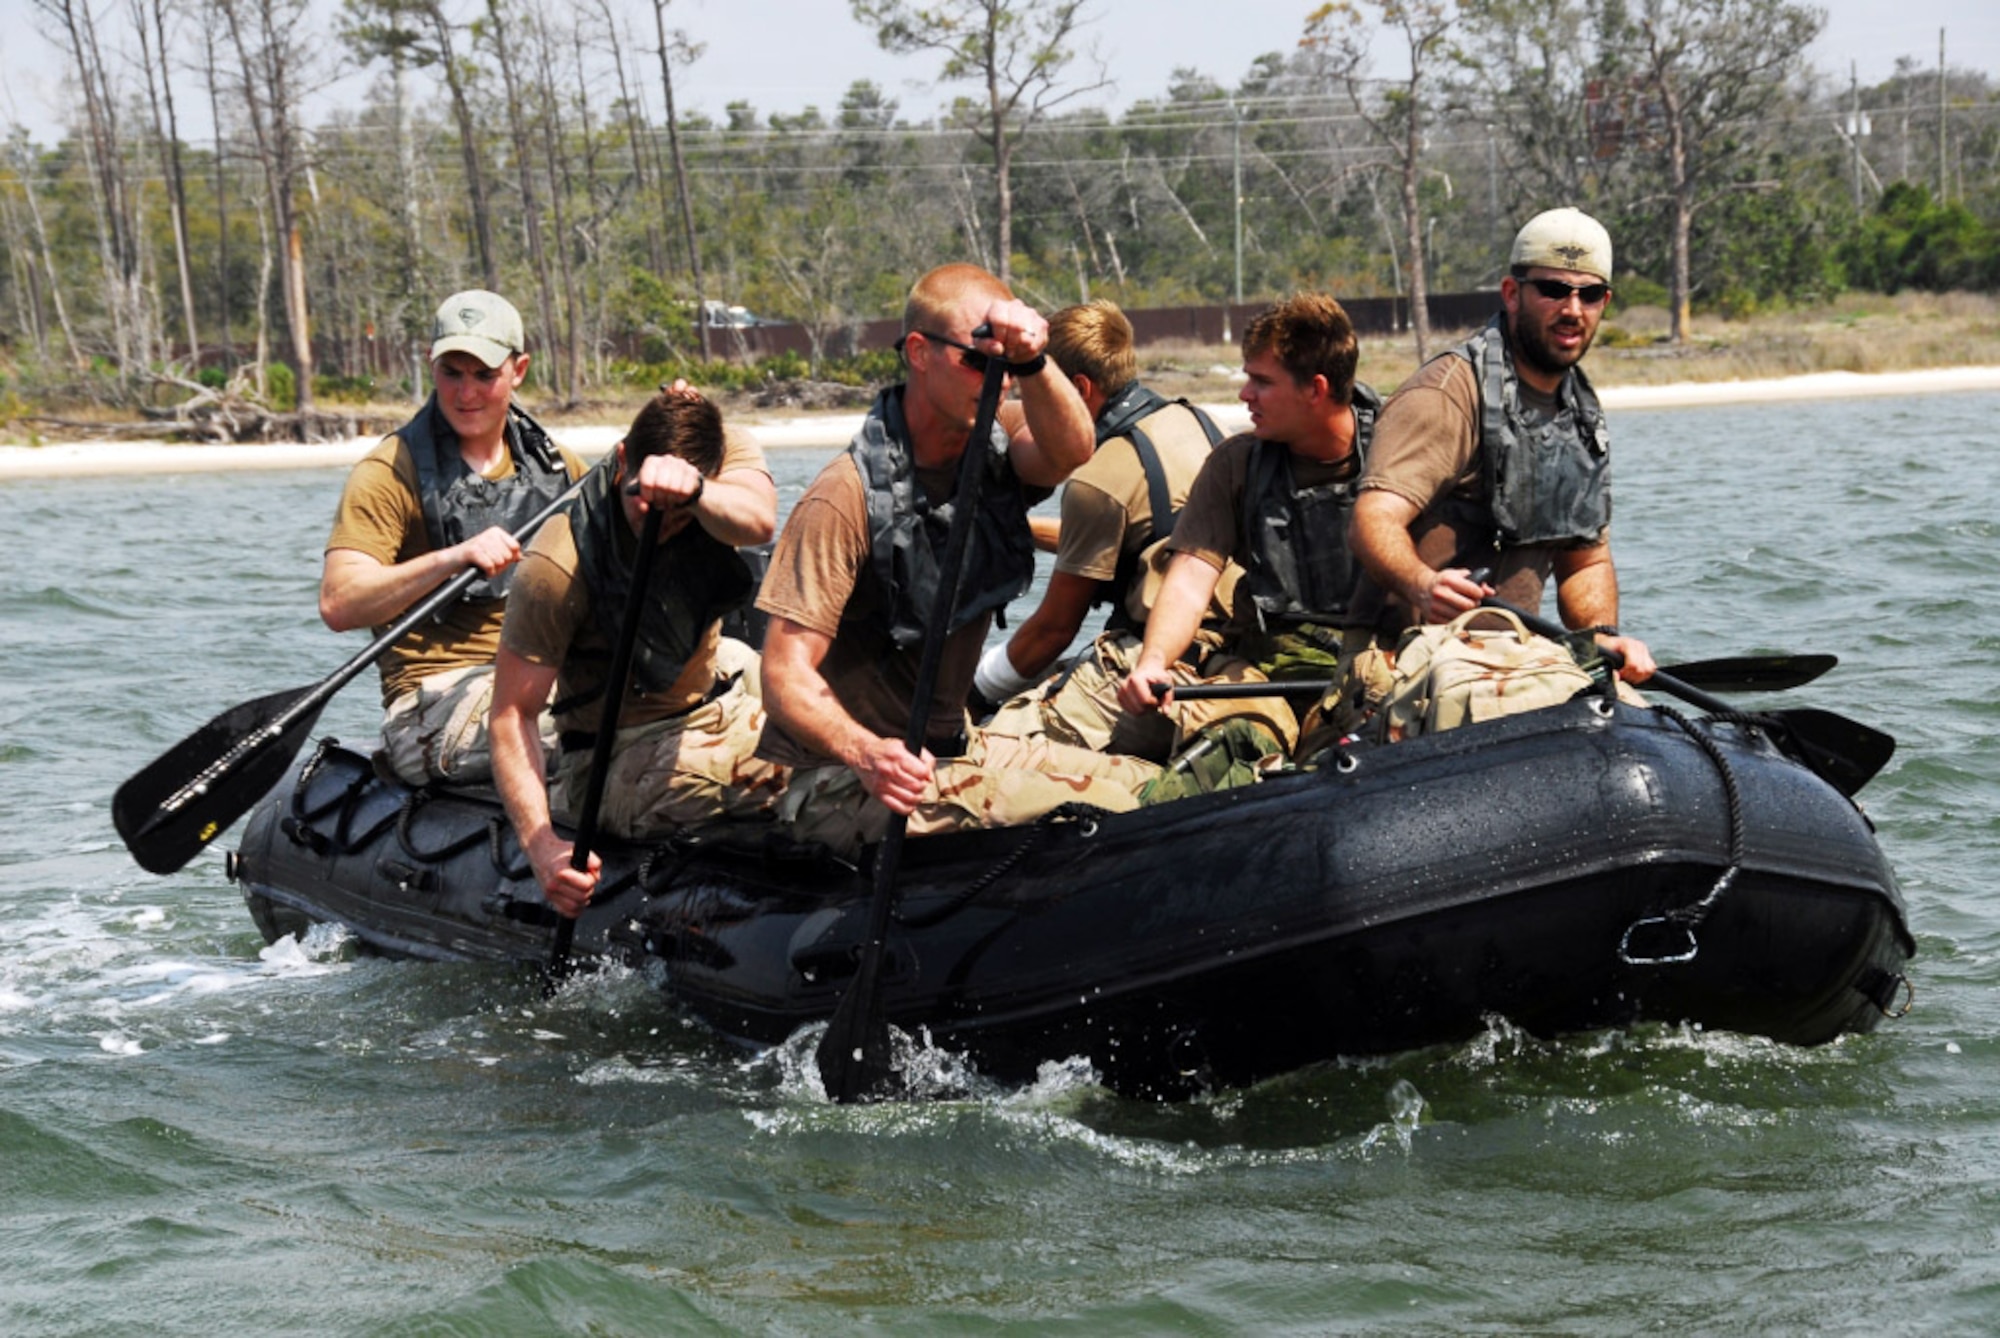 Staff Sgt. Timothy P. Davis (back left of boat) participated in amphibious training with his team. Sergeant Davis died of wounds suffered when his vehicle encountered an improvised explosive device Feb. 20 in Afghanistan. He was assigned to the 23rd Special Tactics Squadron at Hurlburt Field, Fla. (U.S. Air Force photo) 